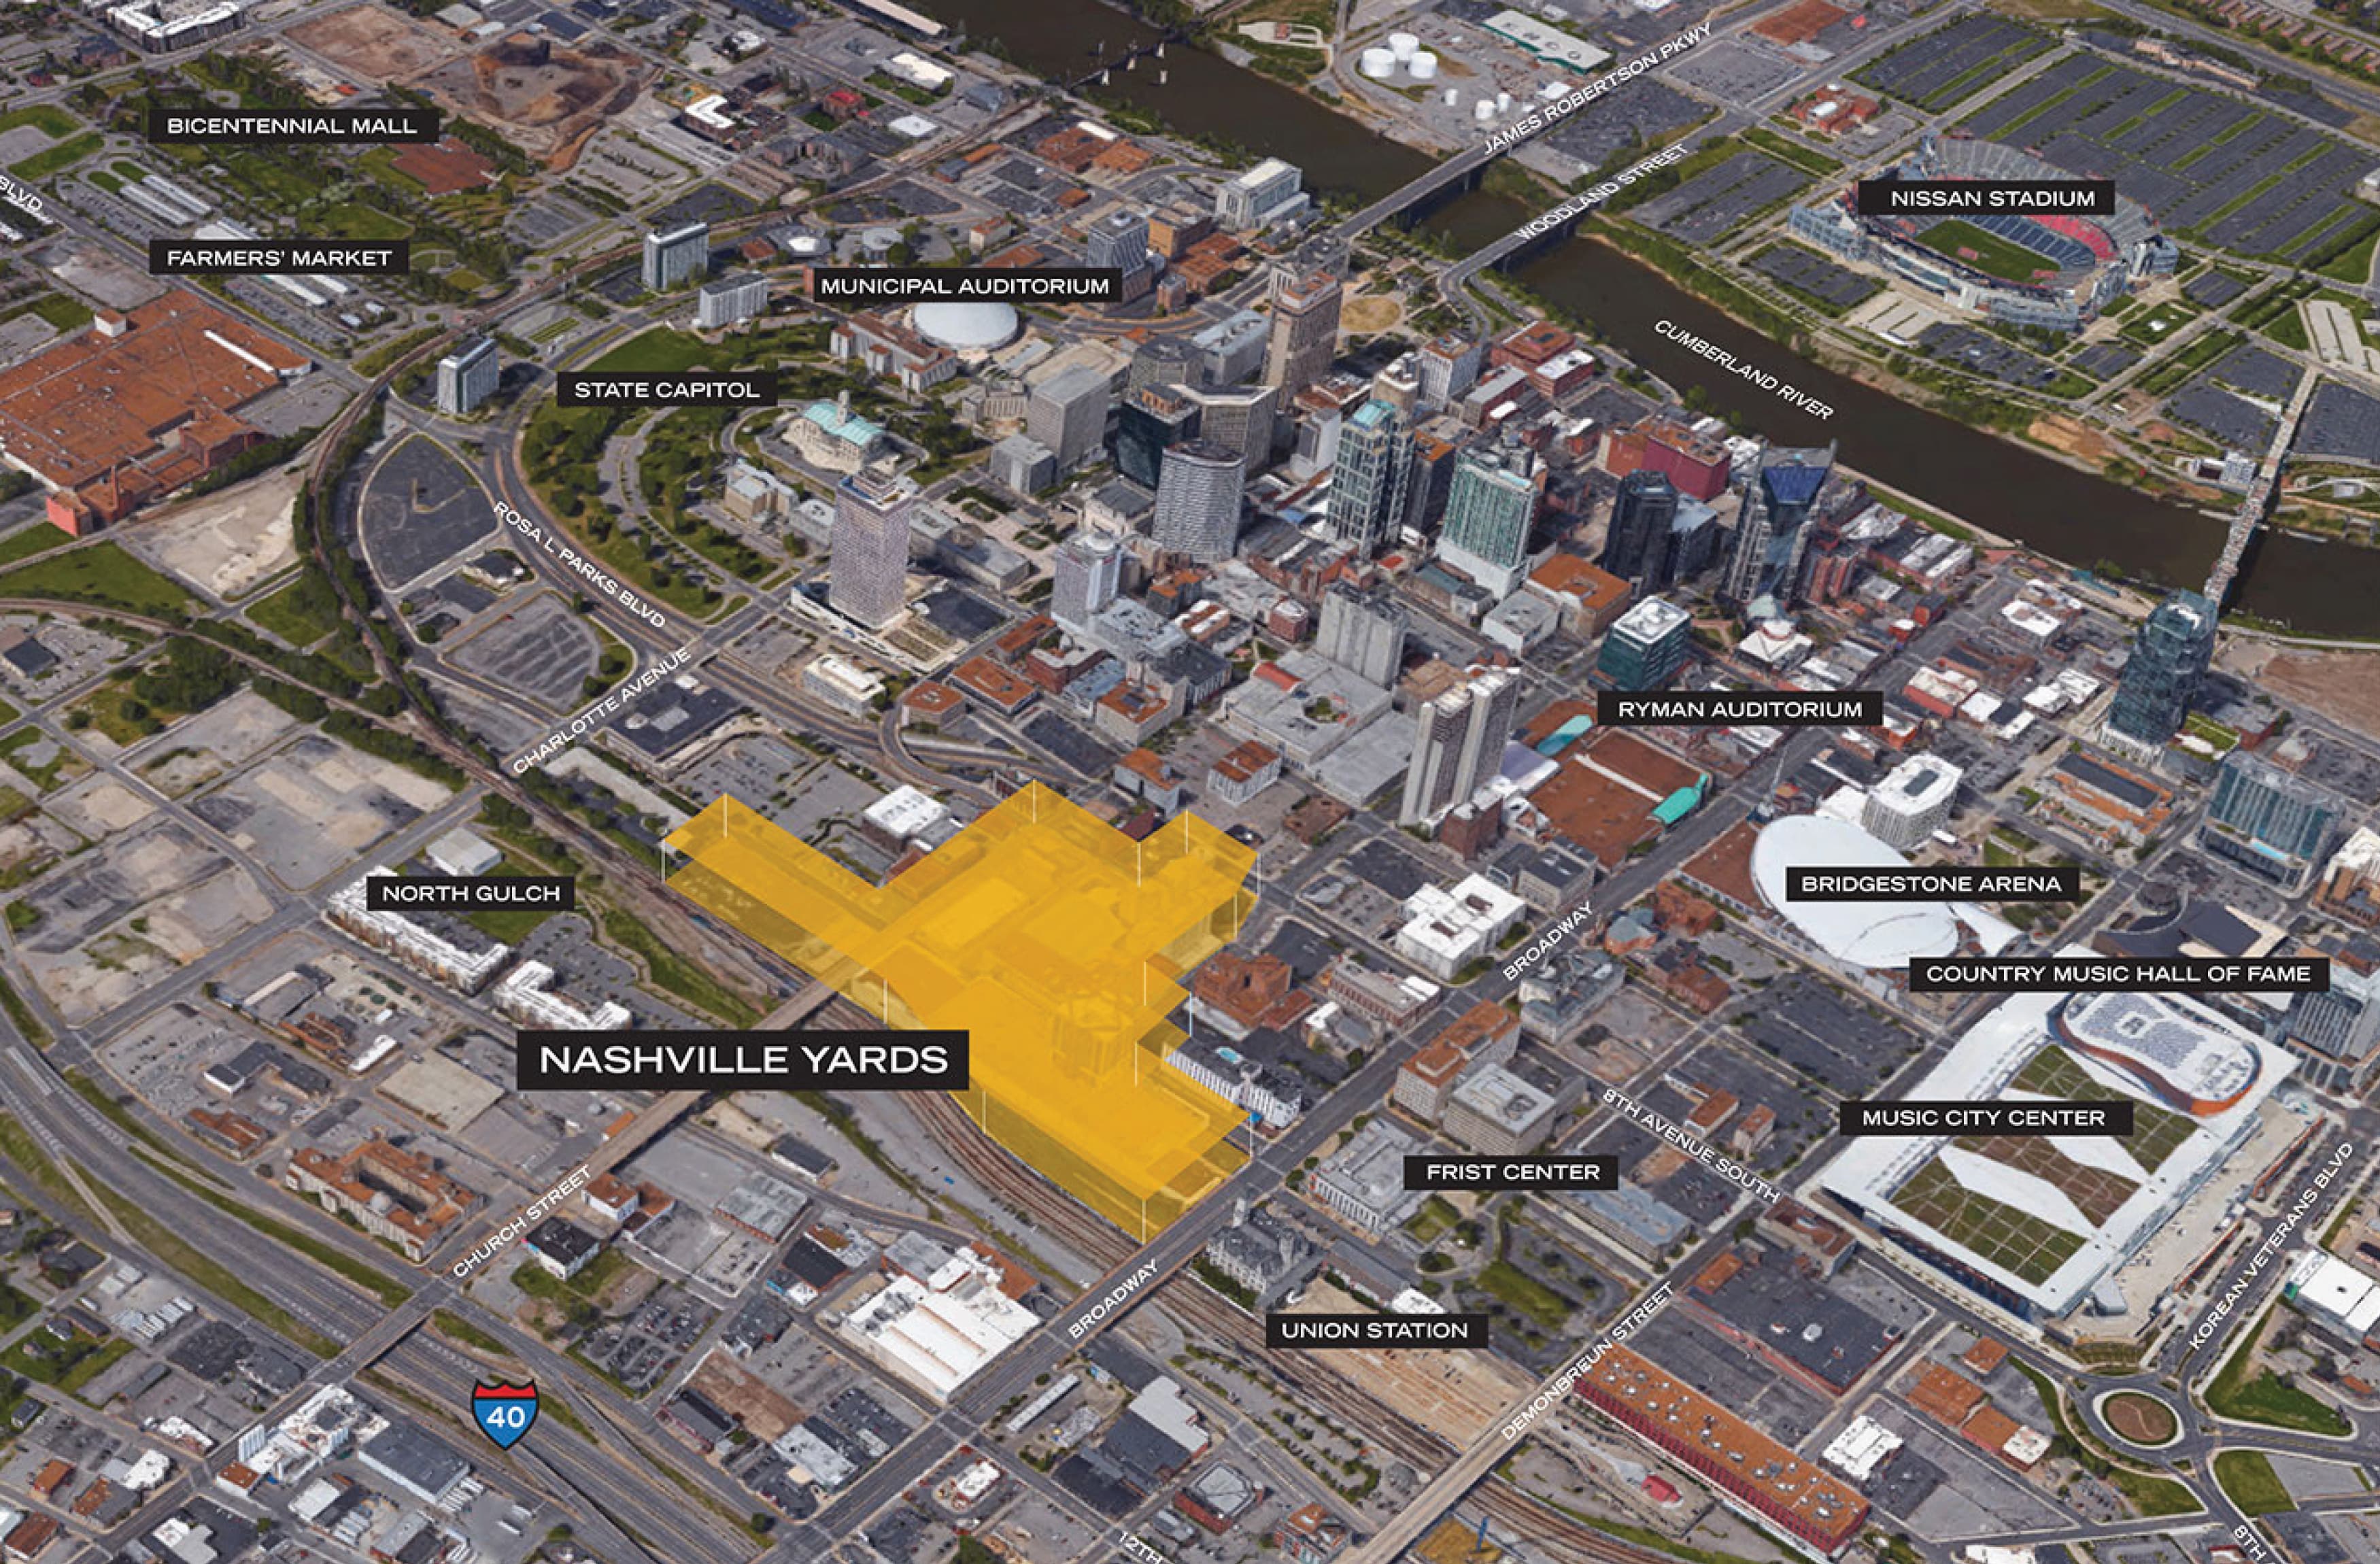 Map of Nashville Yards in Nashville, Tennessee amongst neighboring tourist destinations such as Union Station, Music City Hall, and the Ryman Auditorium. 